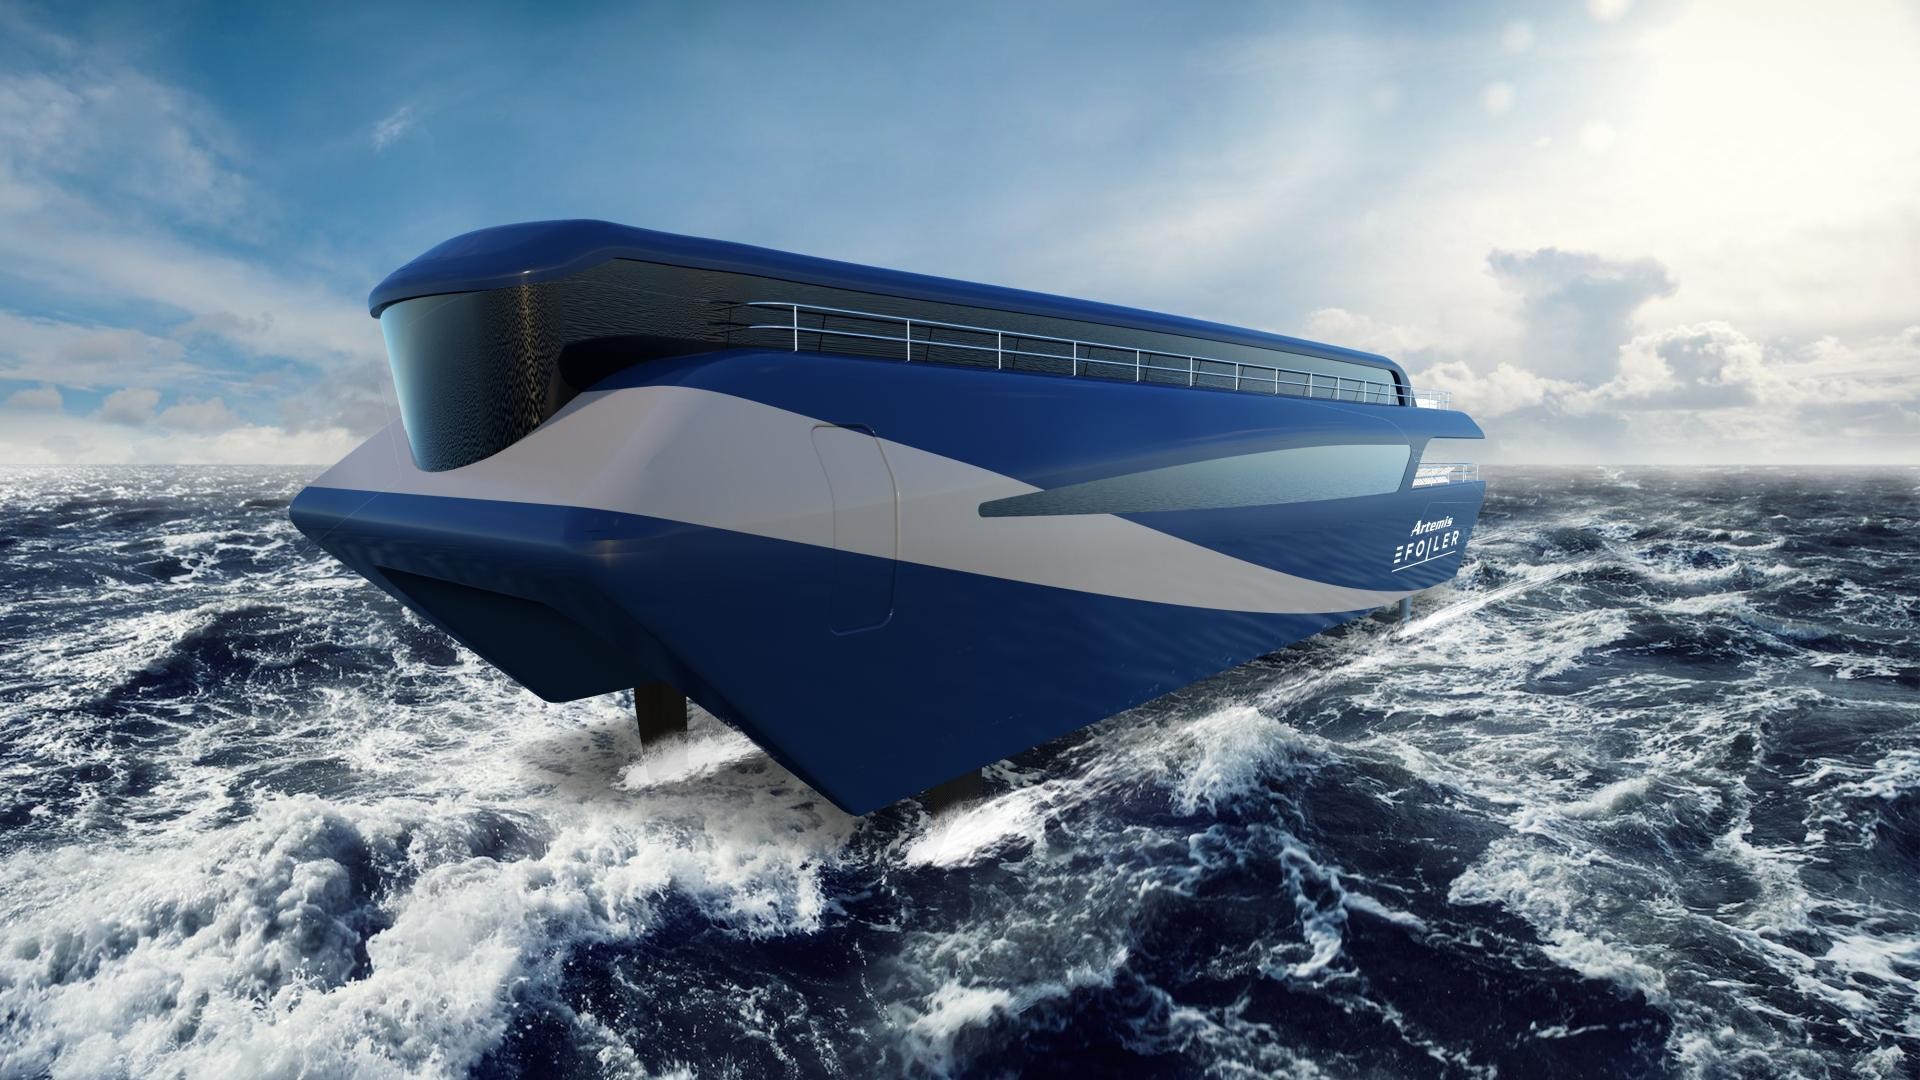 Artemis Technologies is leading the Belfast Maritime Consortium to build a new class of zero-emission fast ferries